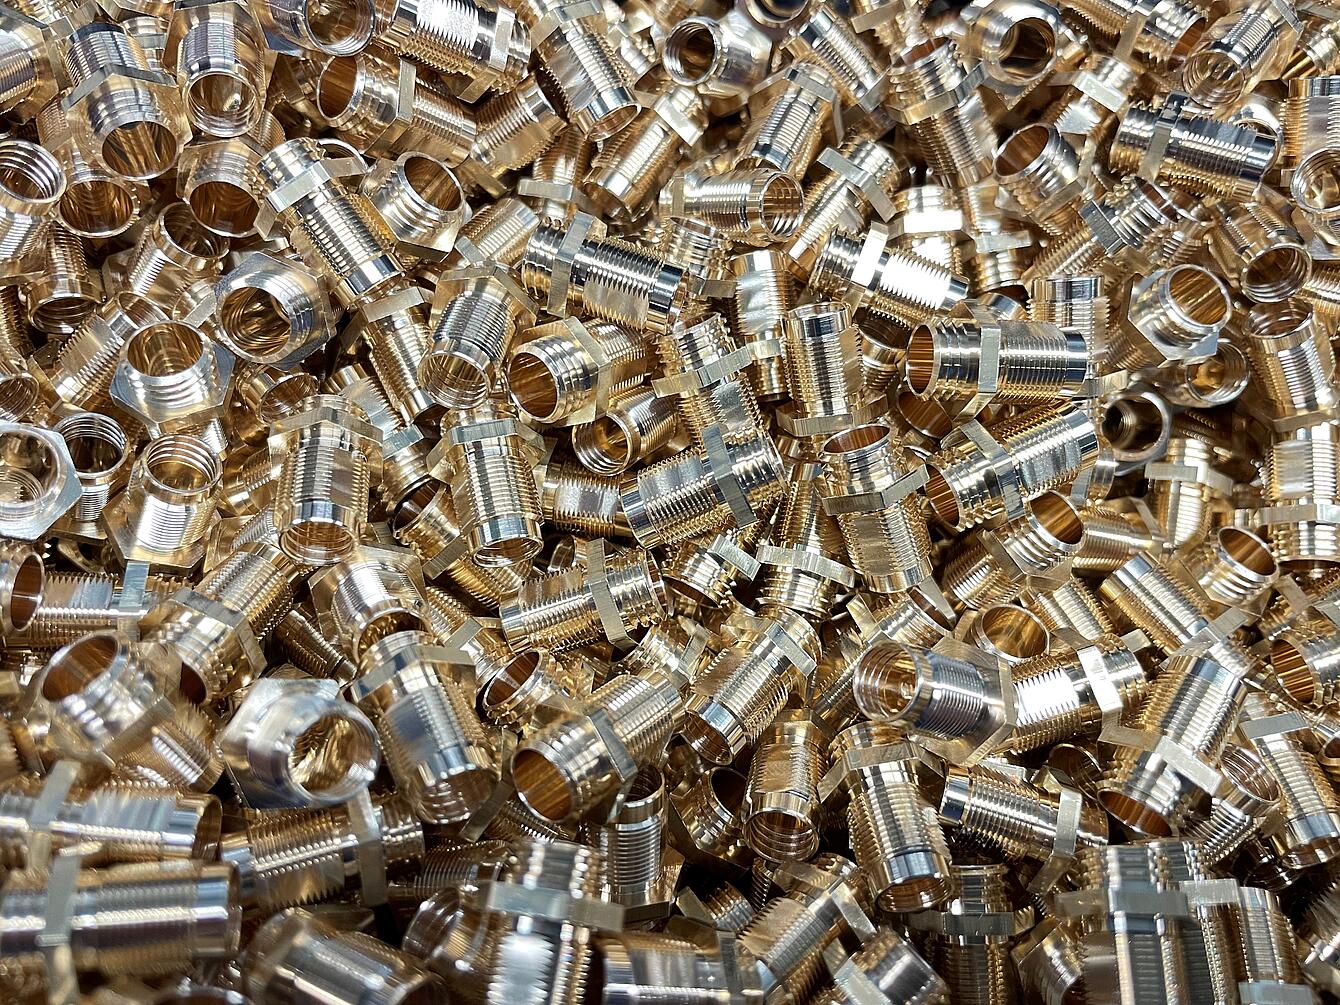 Brass turned parts, Precision turned parts, Connector